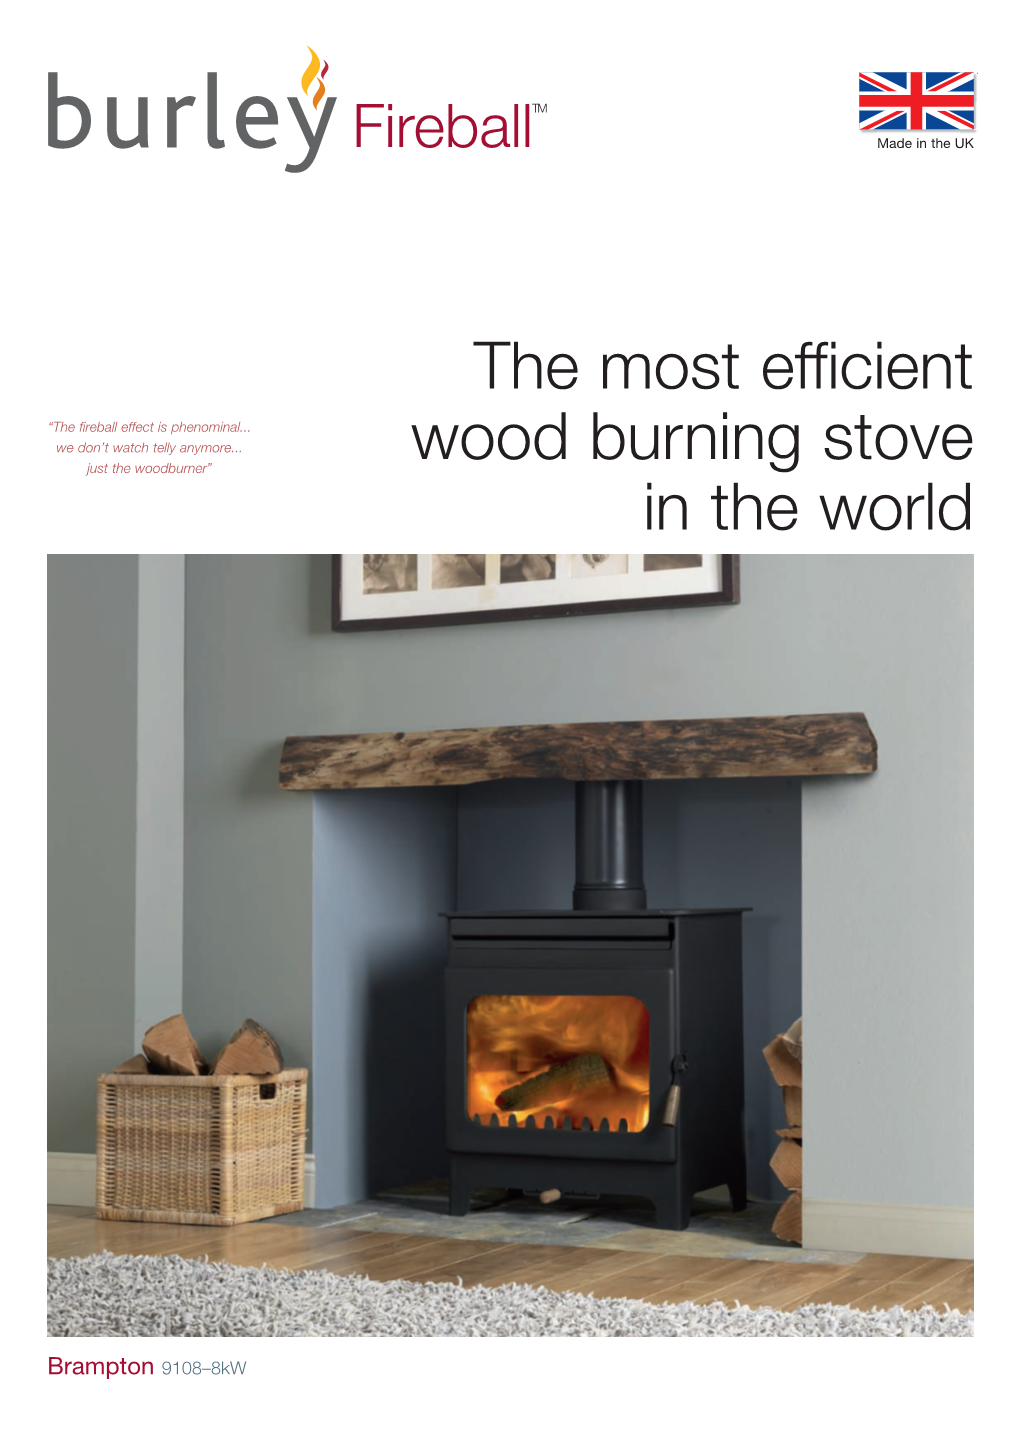 The Most Efficient Wood Burning Stove in the World